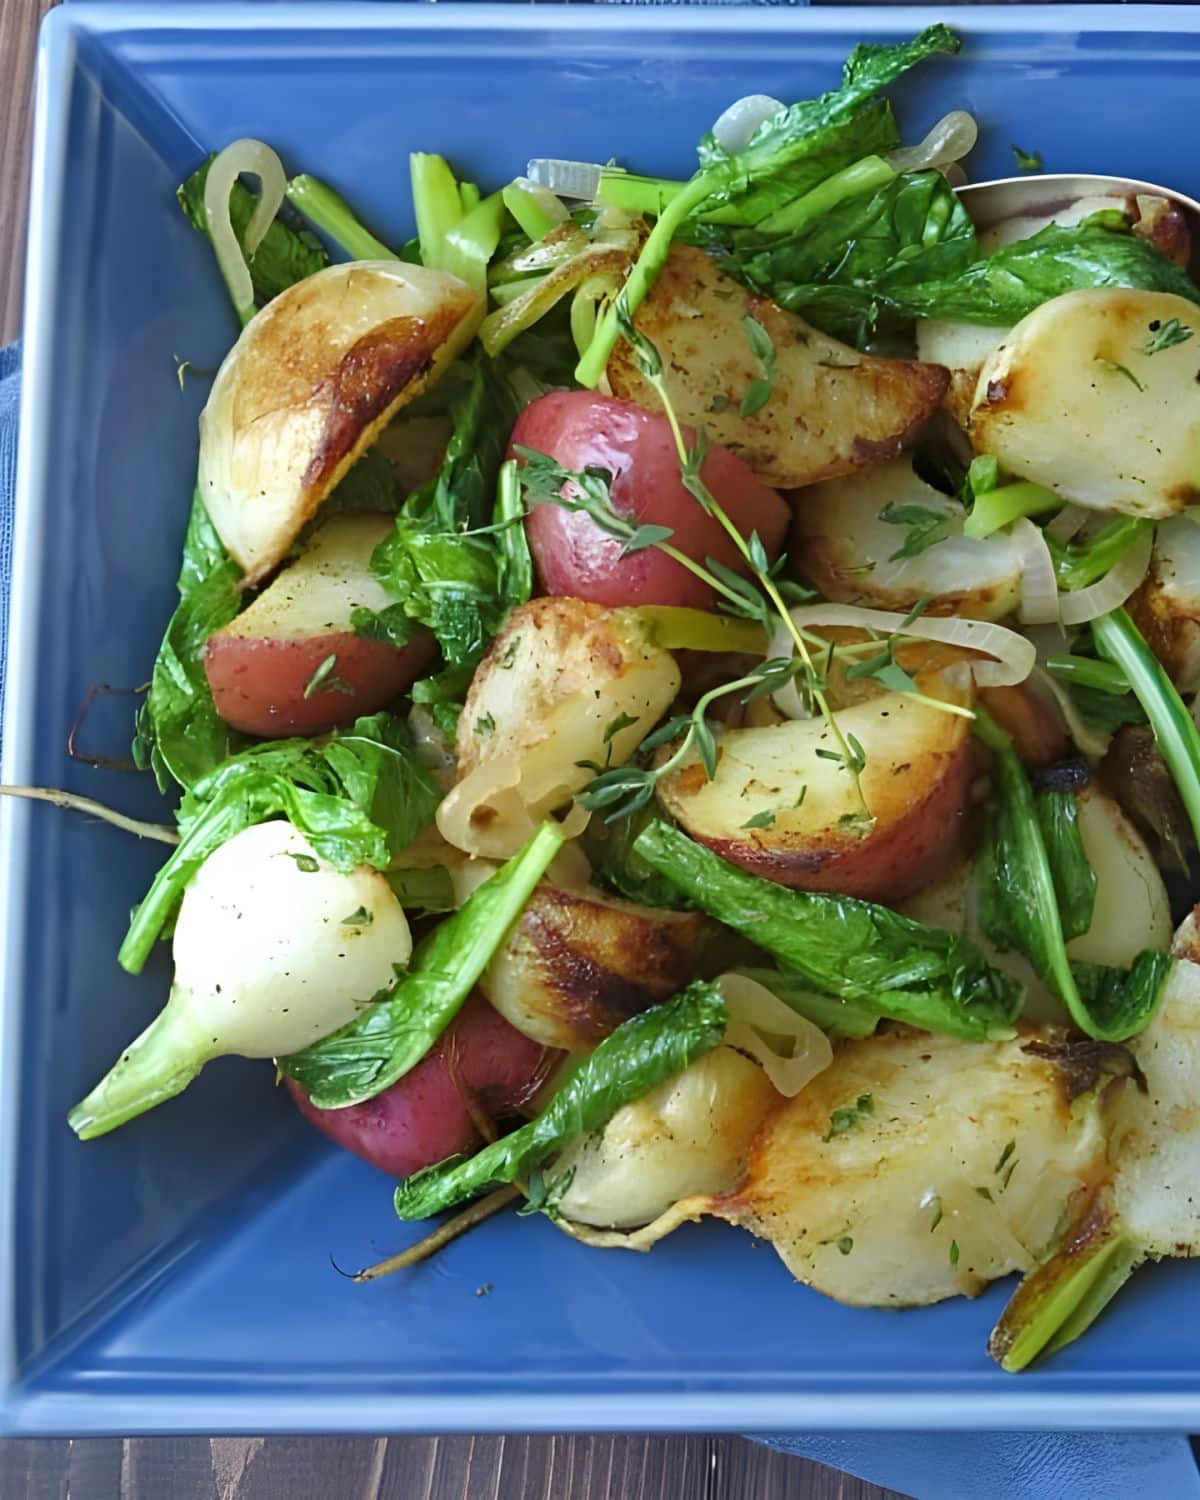 Serving the turnips and potatoes in a blue bowl.